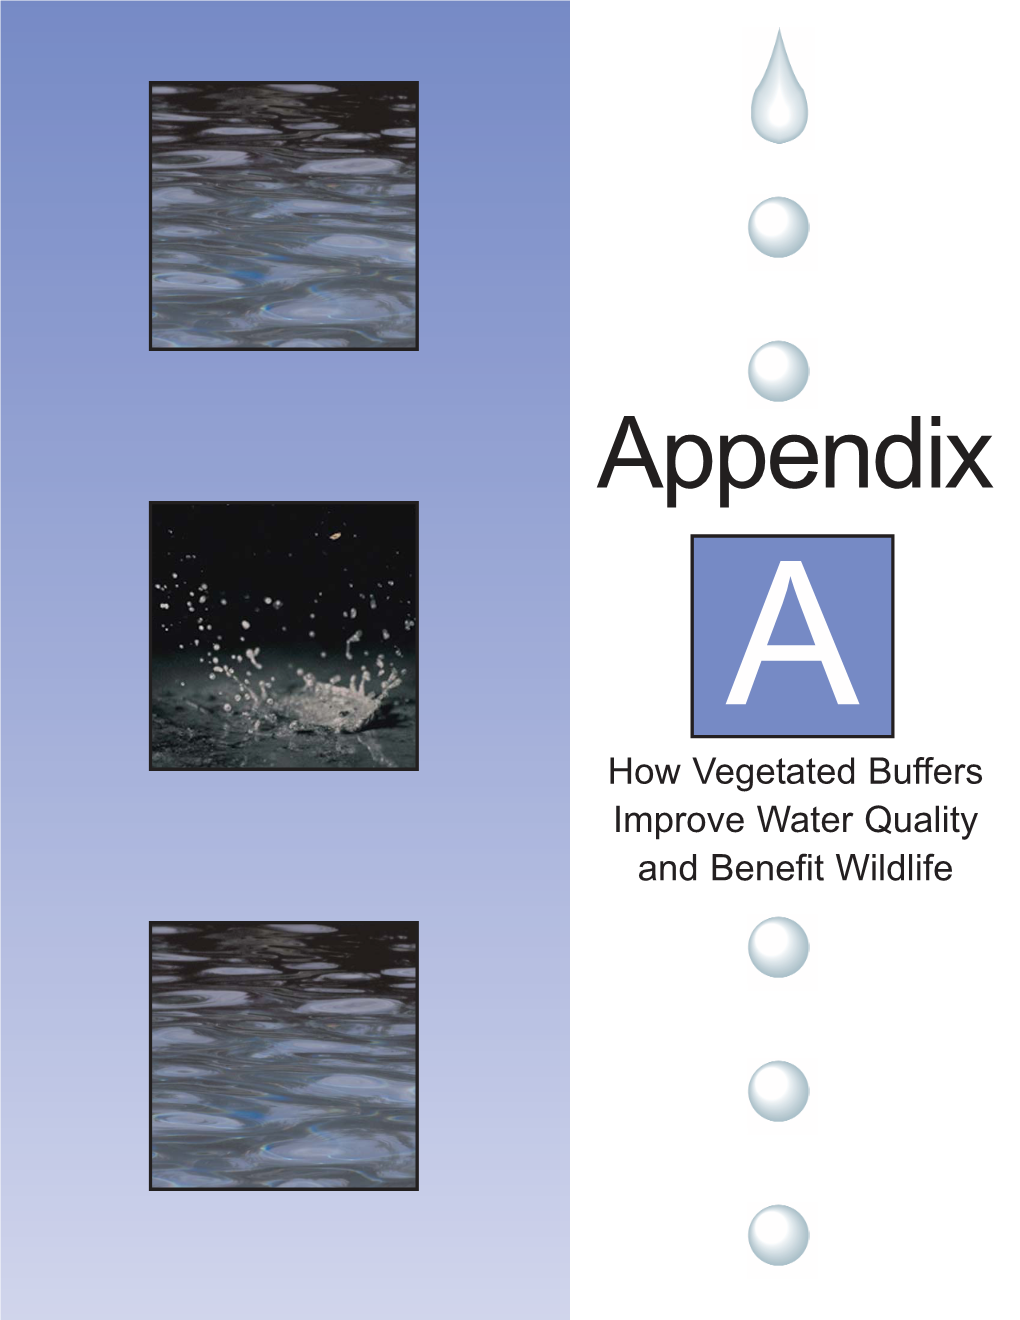 Appendix a How Vegetated Buffers Improve Water Quality and Benefit Wildlife